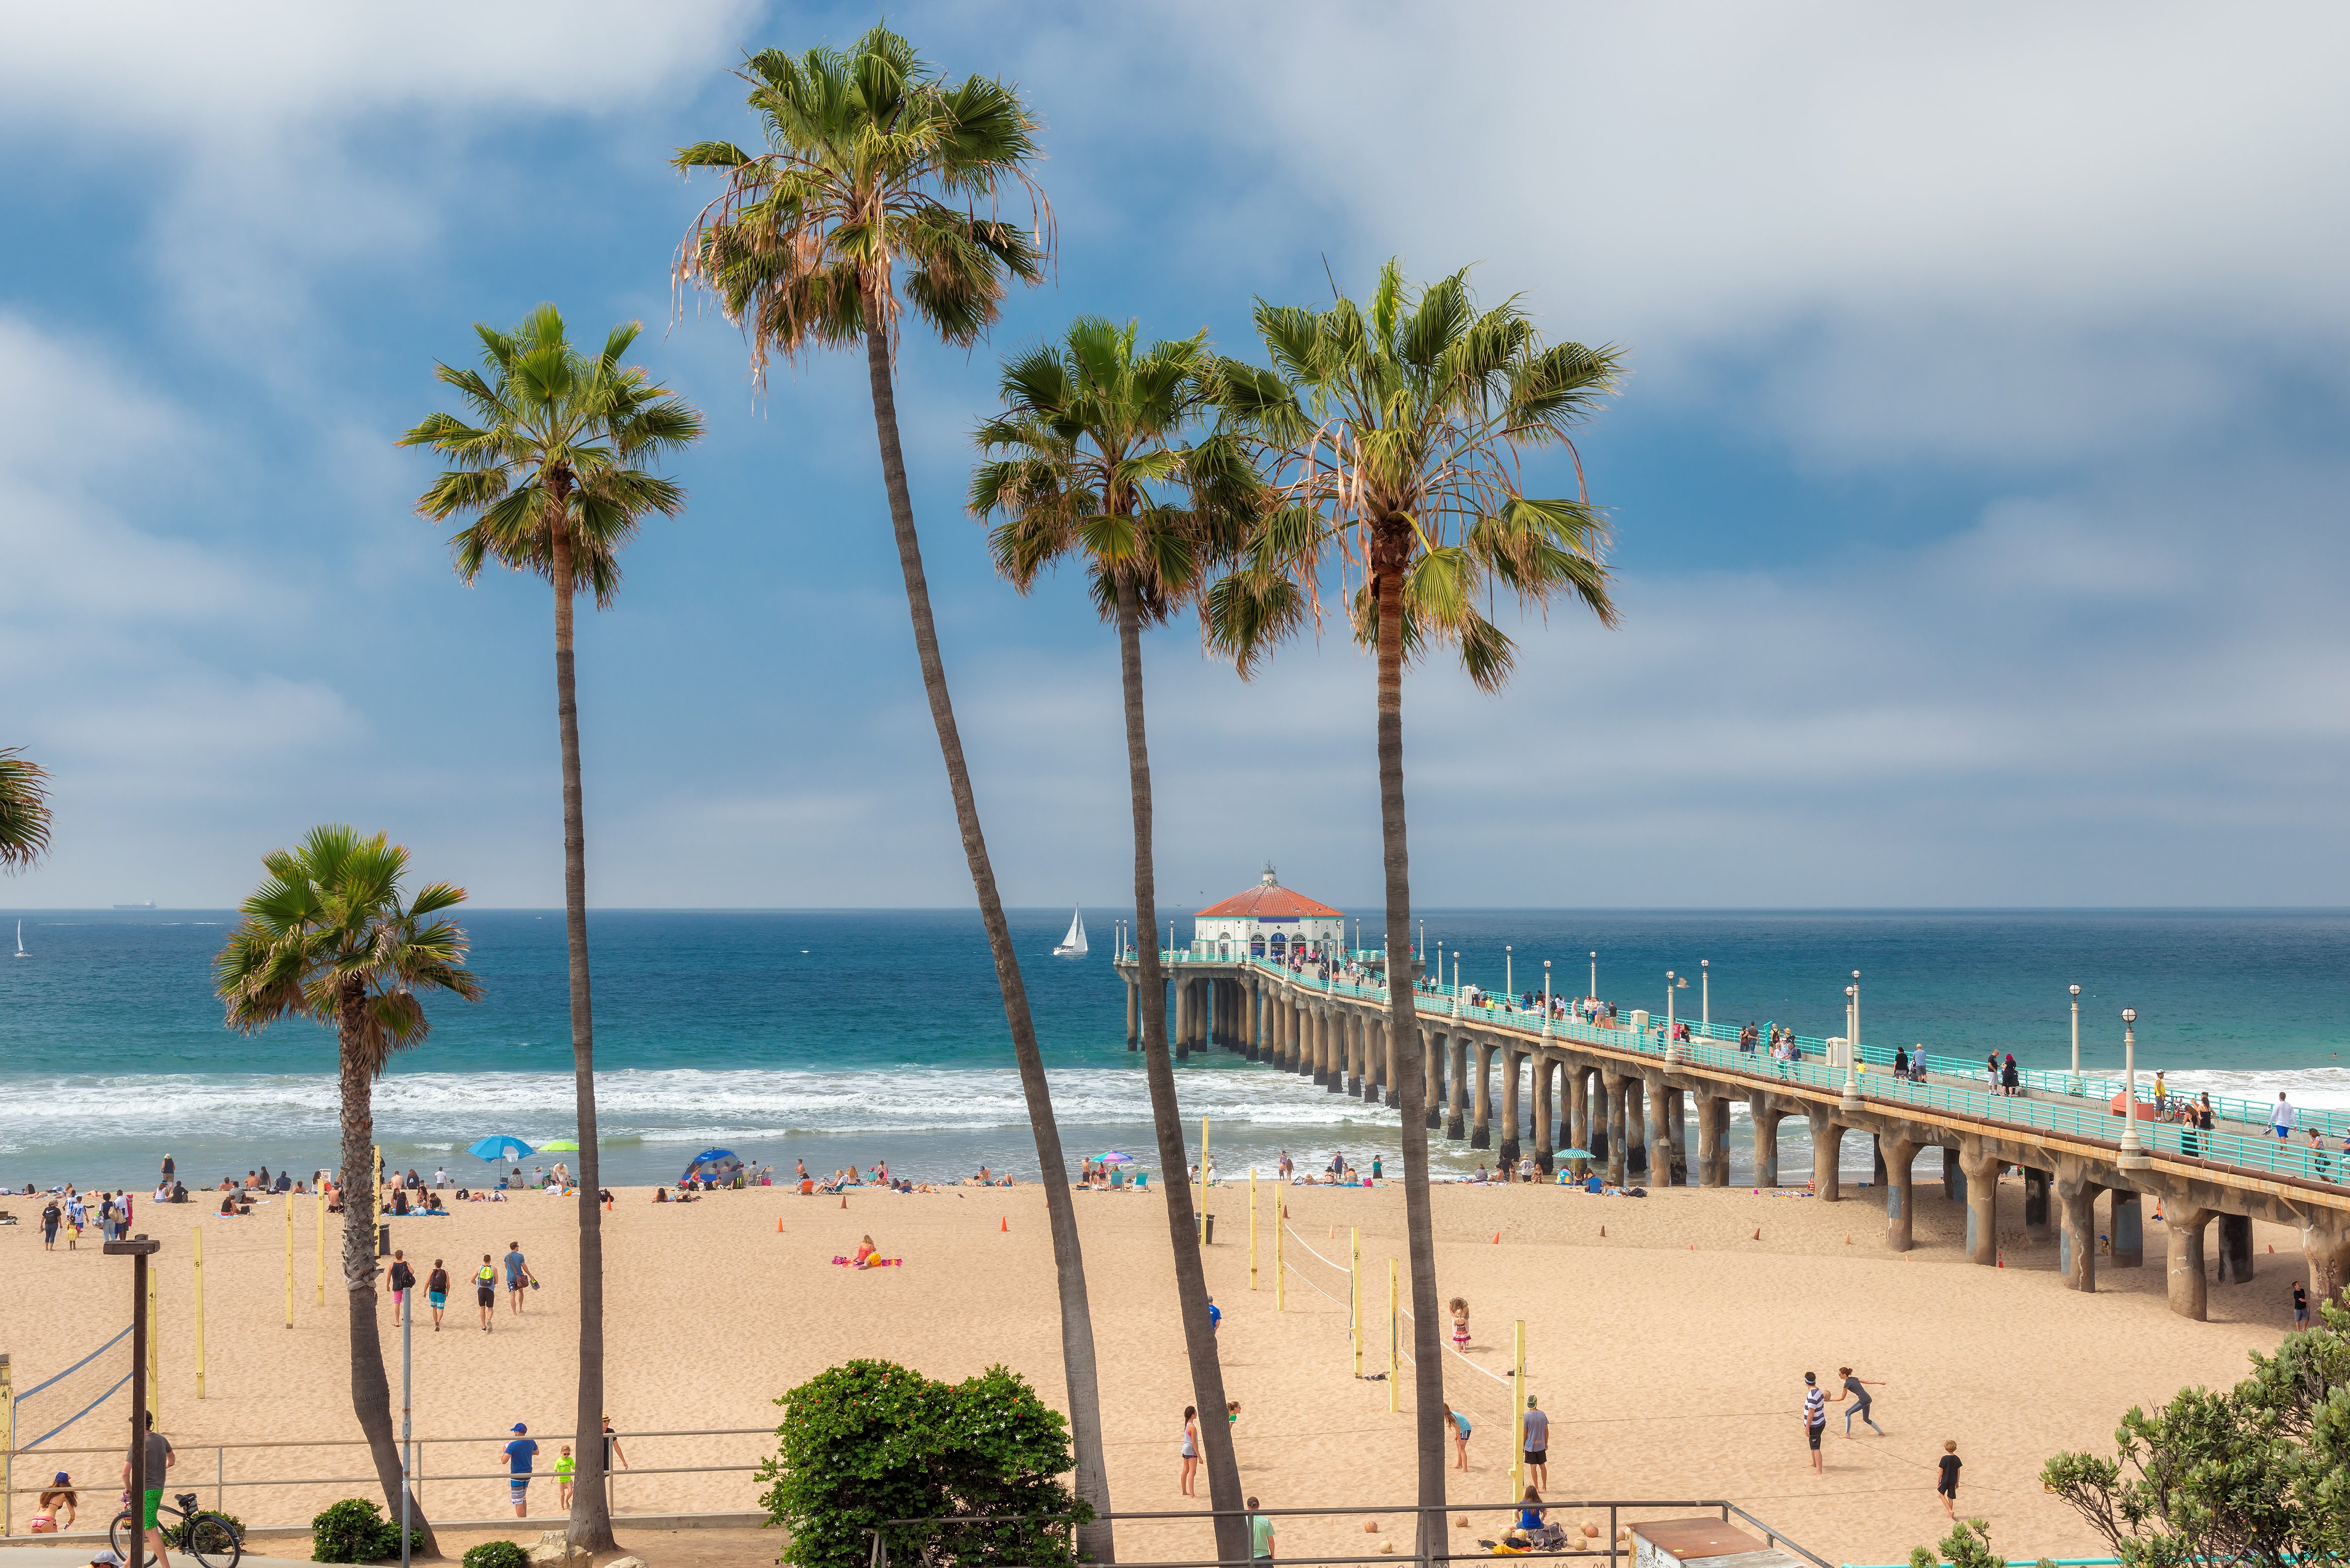 A possible vacation location? Manhattan Beach and Pier in Southern California in Los Angeles. | Source: Shutterstock